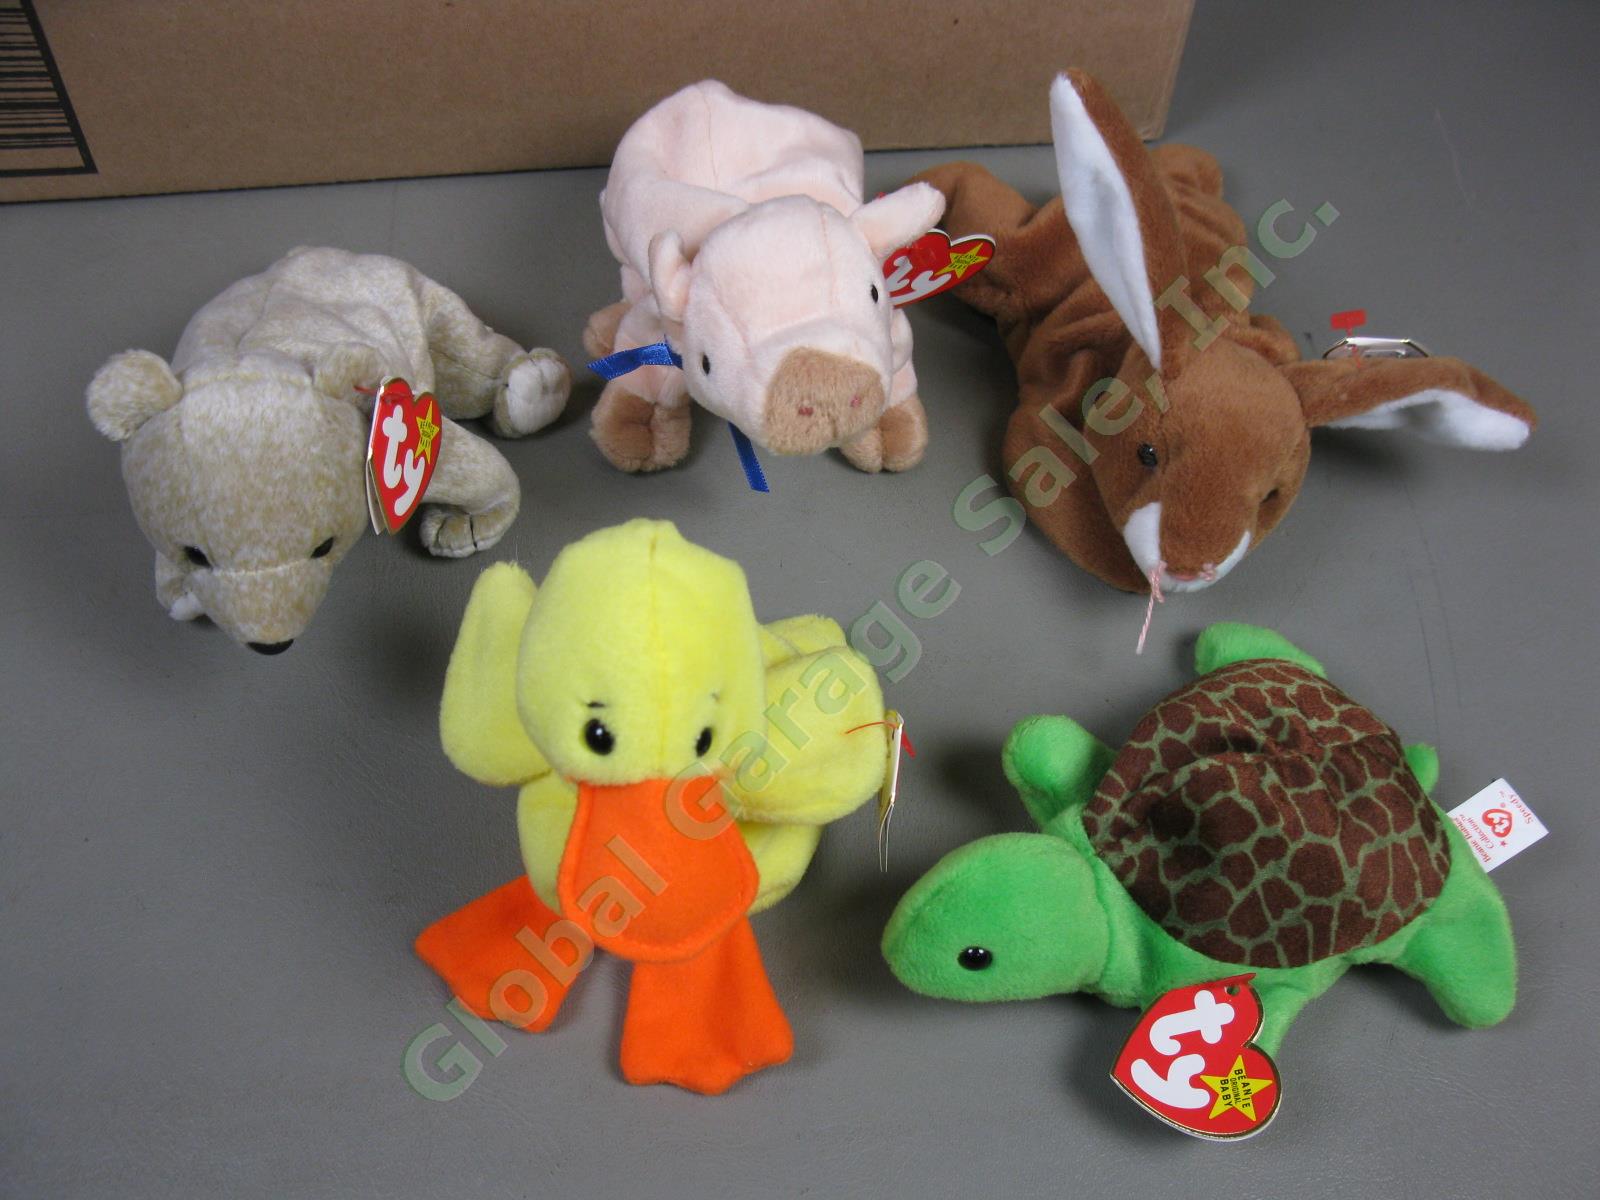 100 Vtg Ty Beanie Babies Lot All Different With Tags 1990s Hoppity Kuku Scaly ++ 2